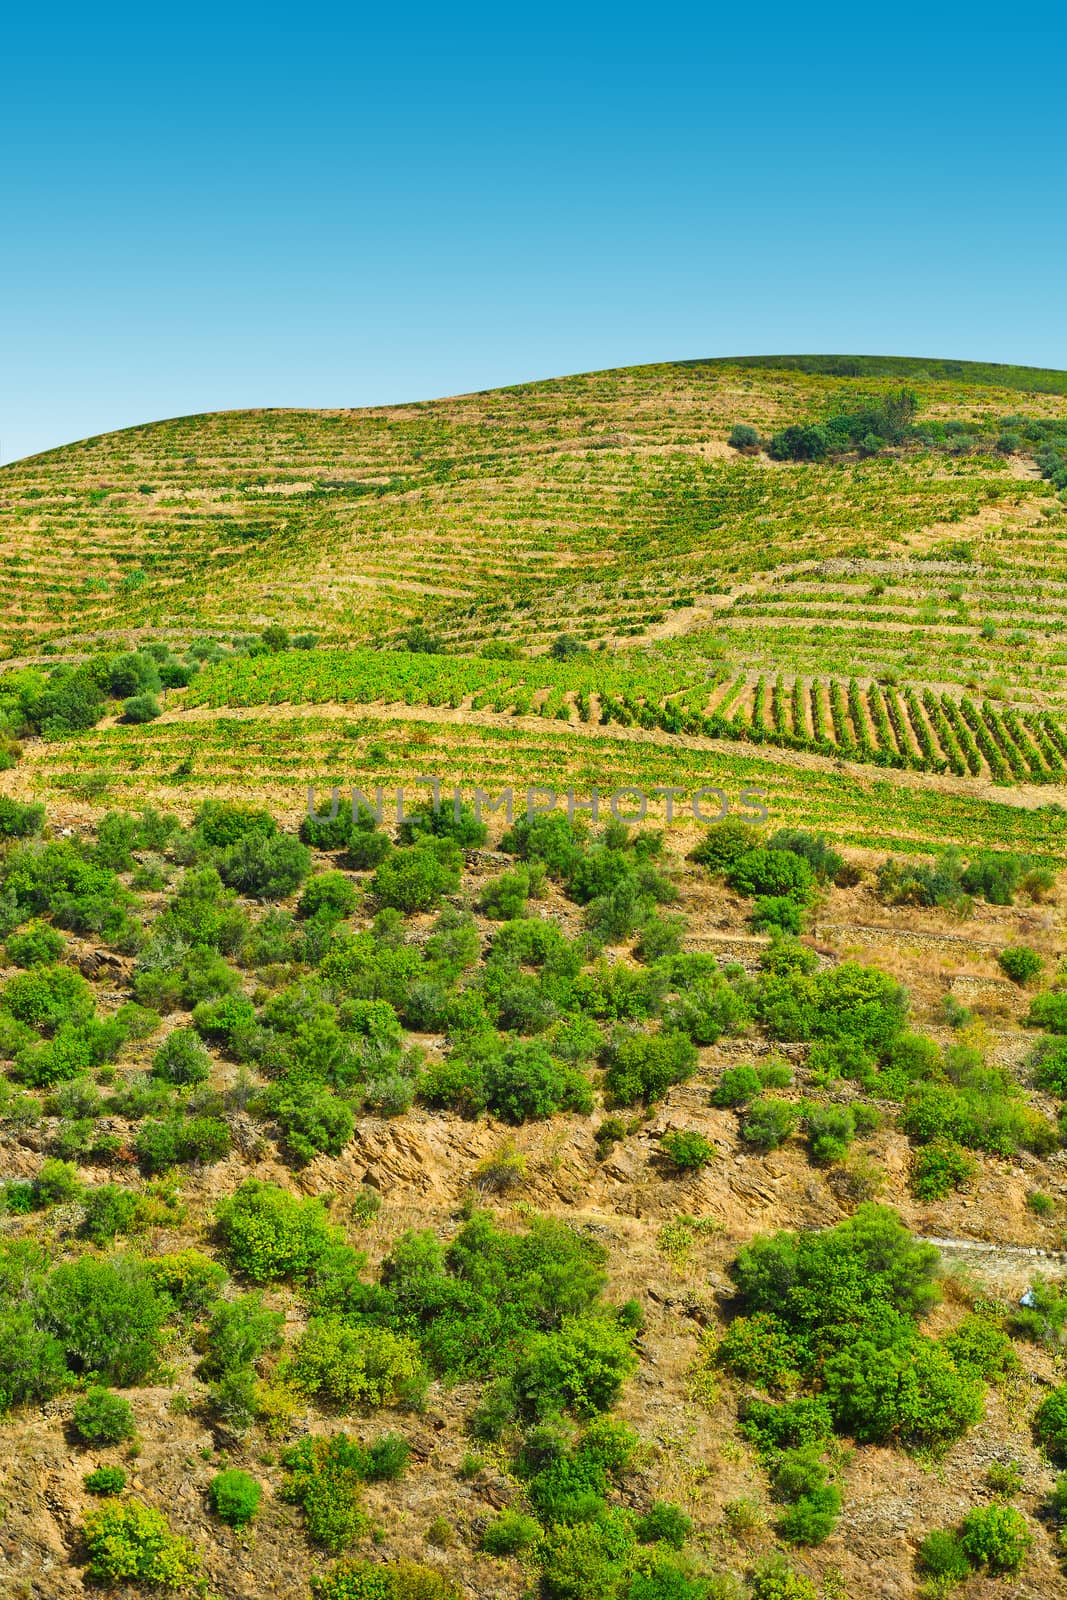 Vineyards on the Hills of Portugal